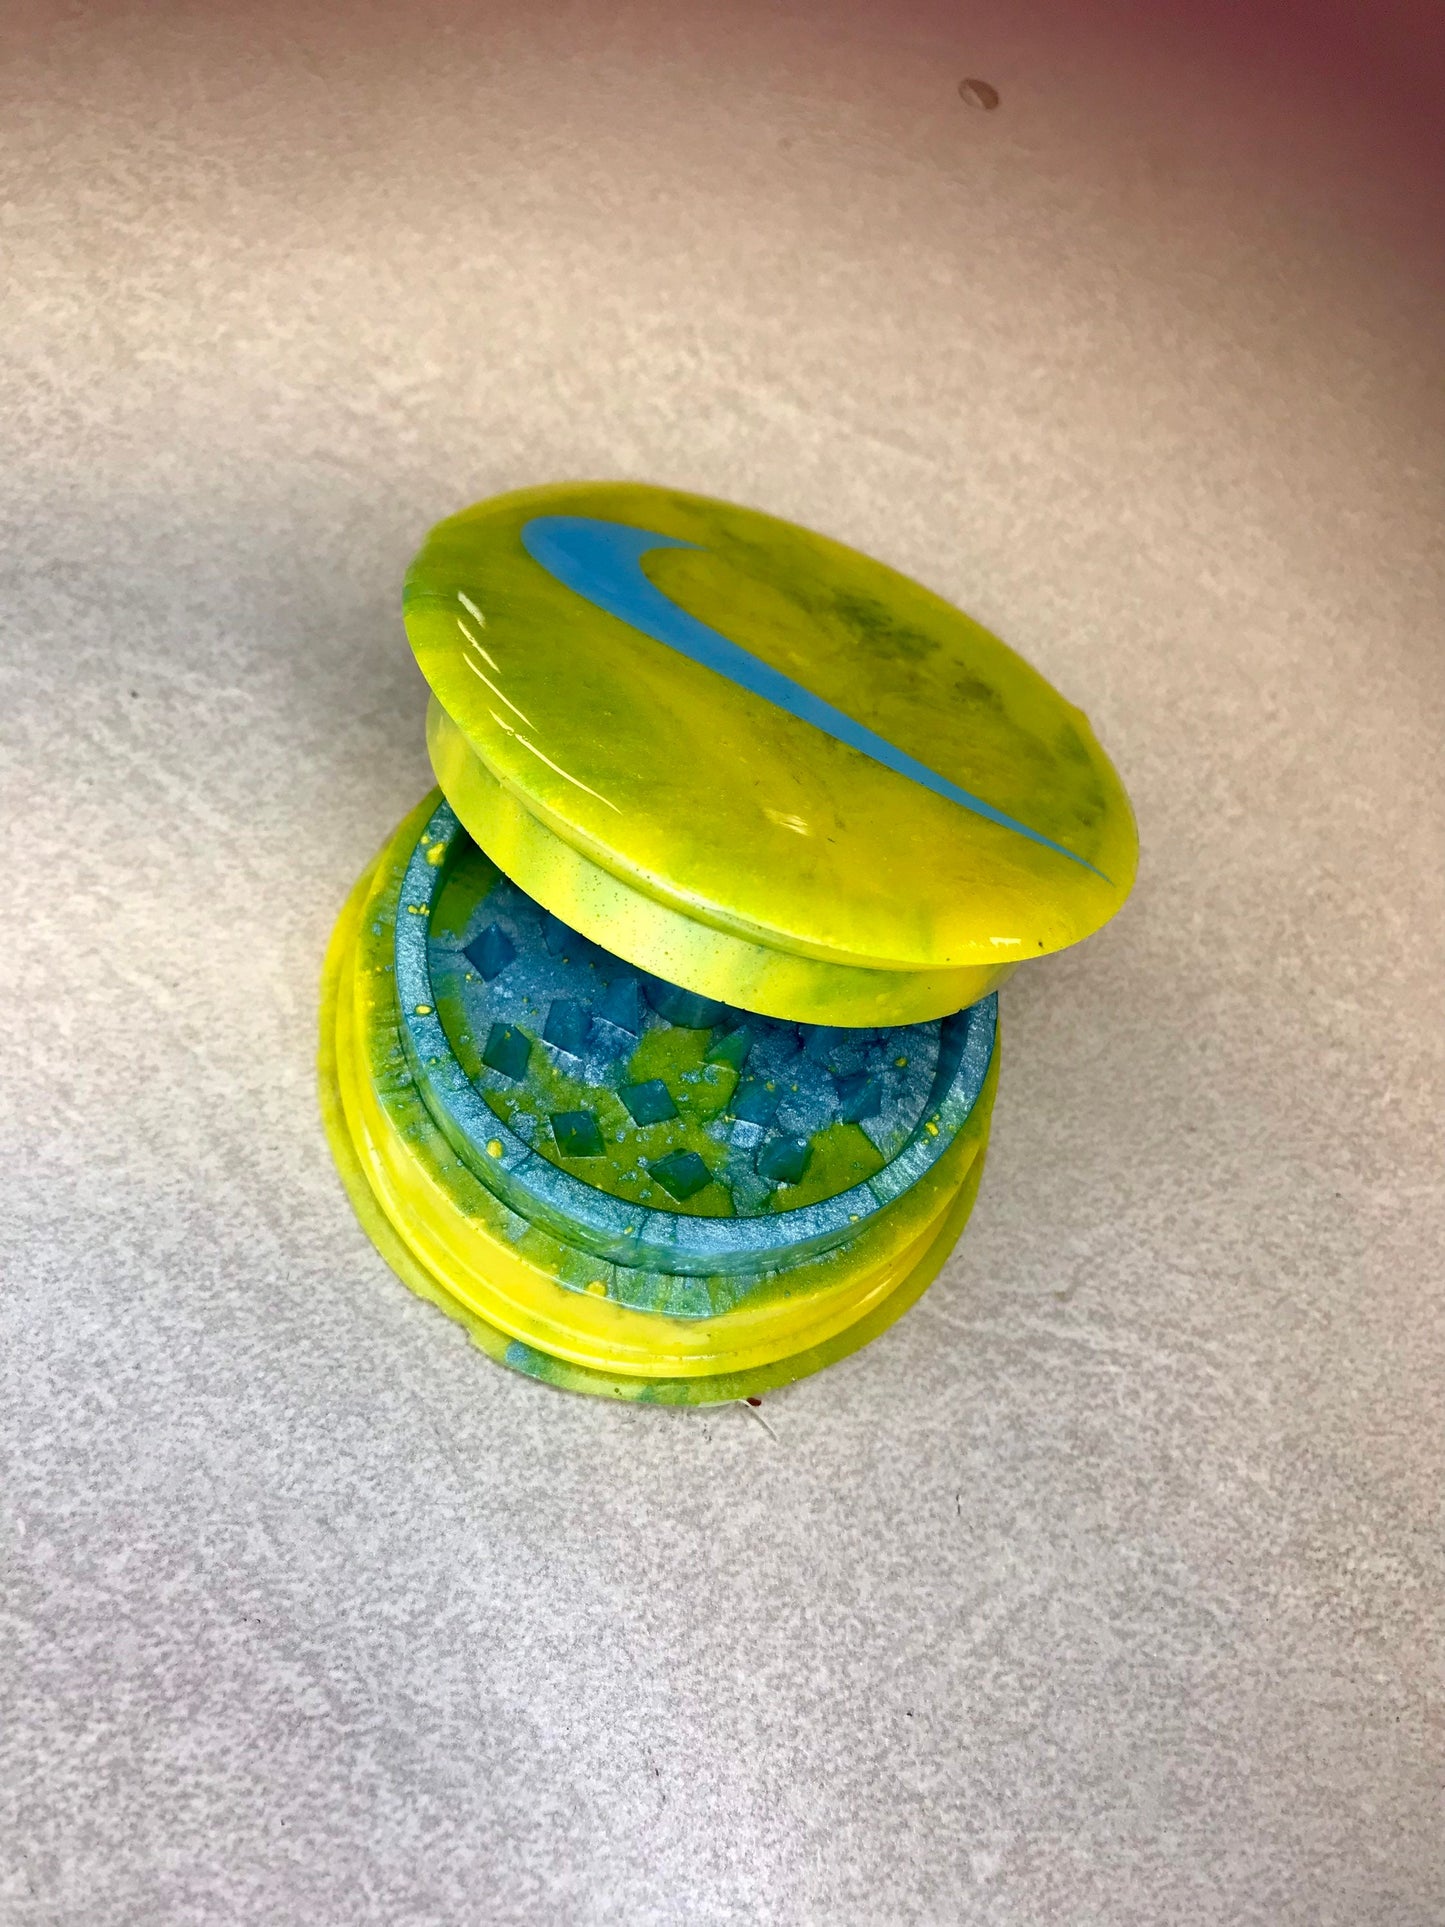 Yellow and Blue Check Mark Grinder, Two-Color Resin Herb Grinder, 2pc